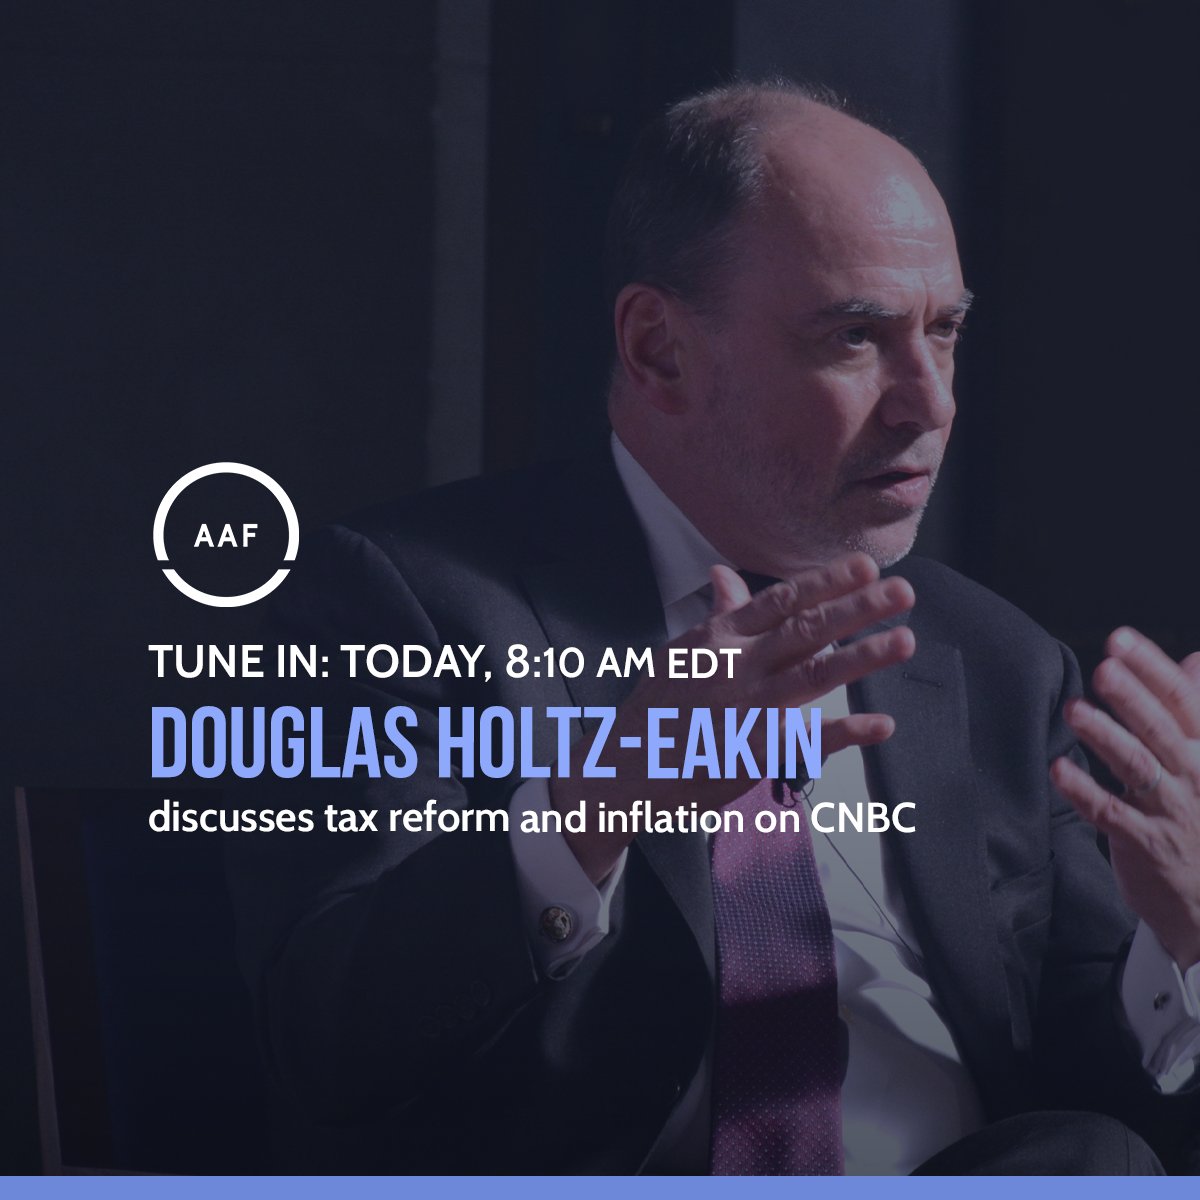 TUNE IN: AAF President @djheakin discusses tax reform and inflation on CNBC at 8:10 am EDT. cnbc.com/live-tv/